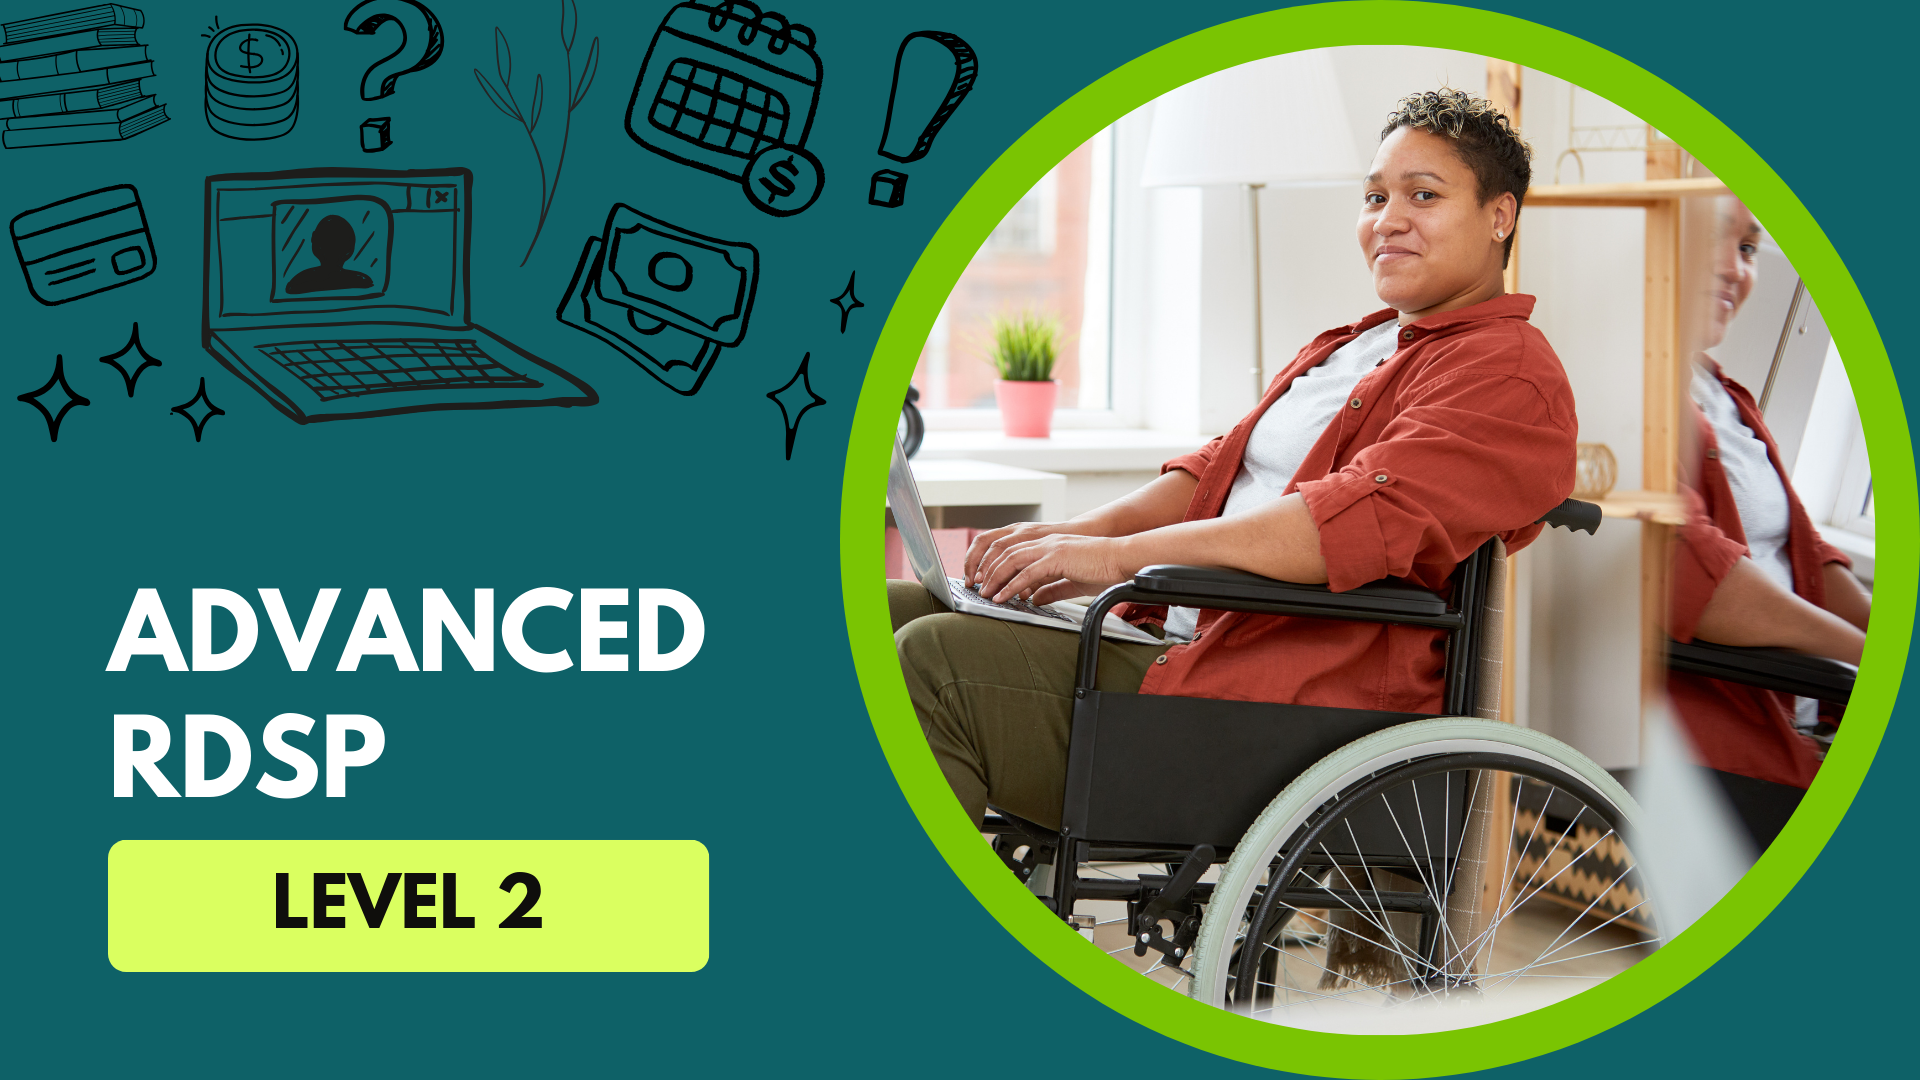 Teal background. Text on the bottom left reads Advanced RDSP, Level 2. Photo of a woman in a wheelchair on the right.